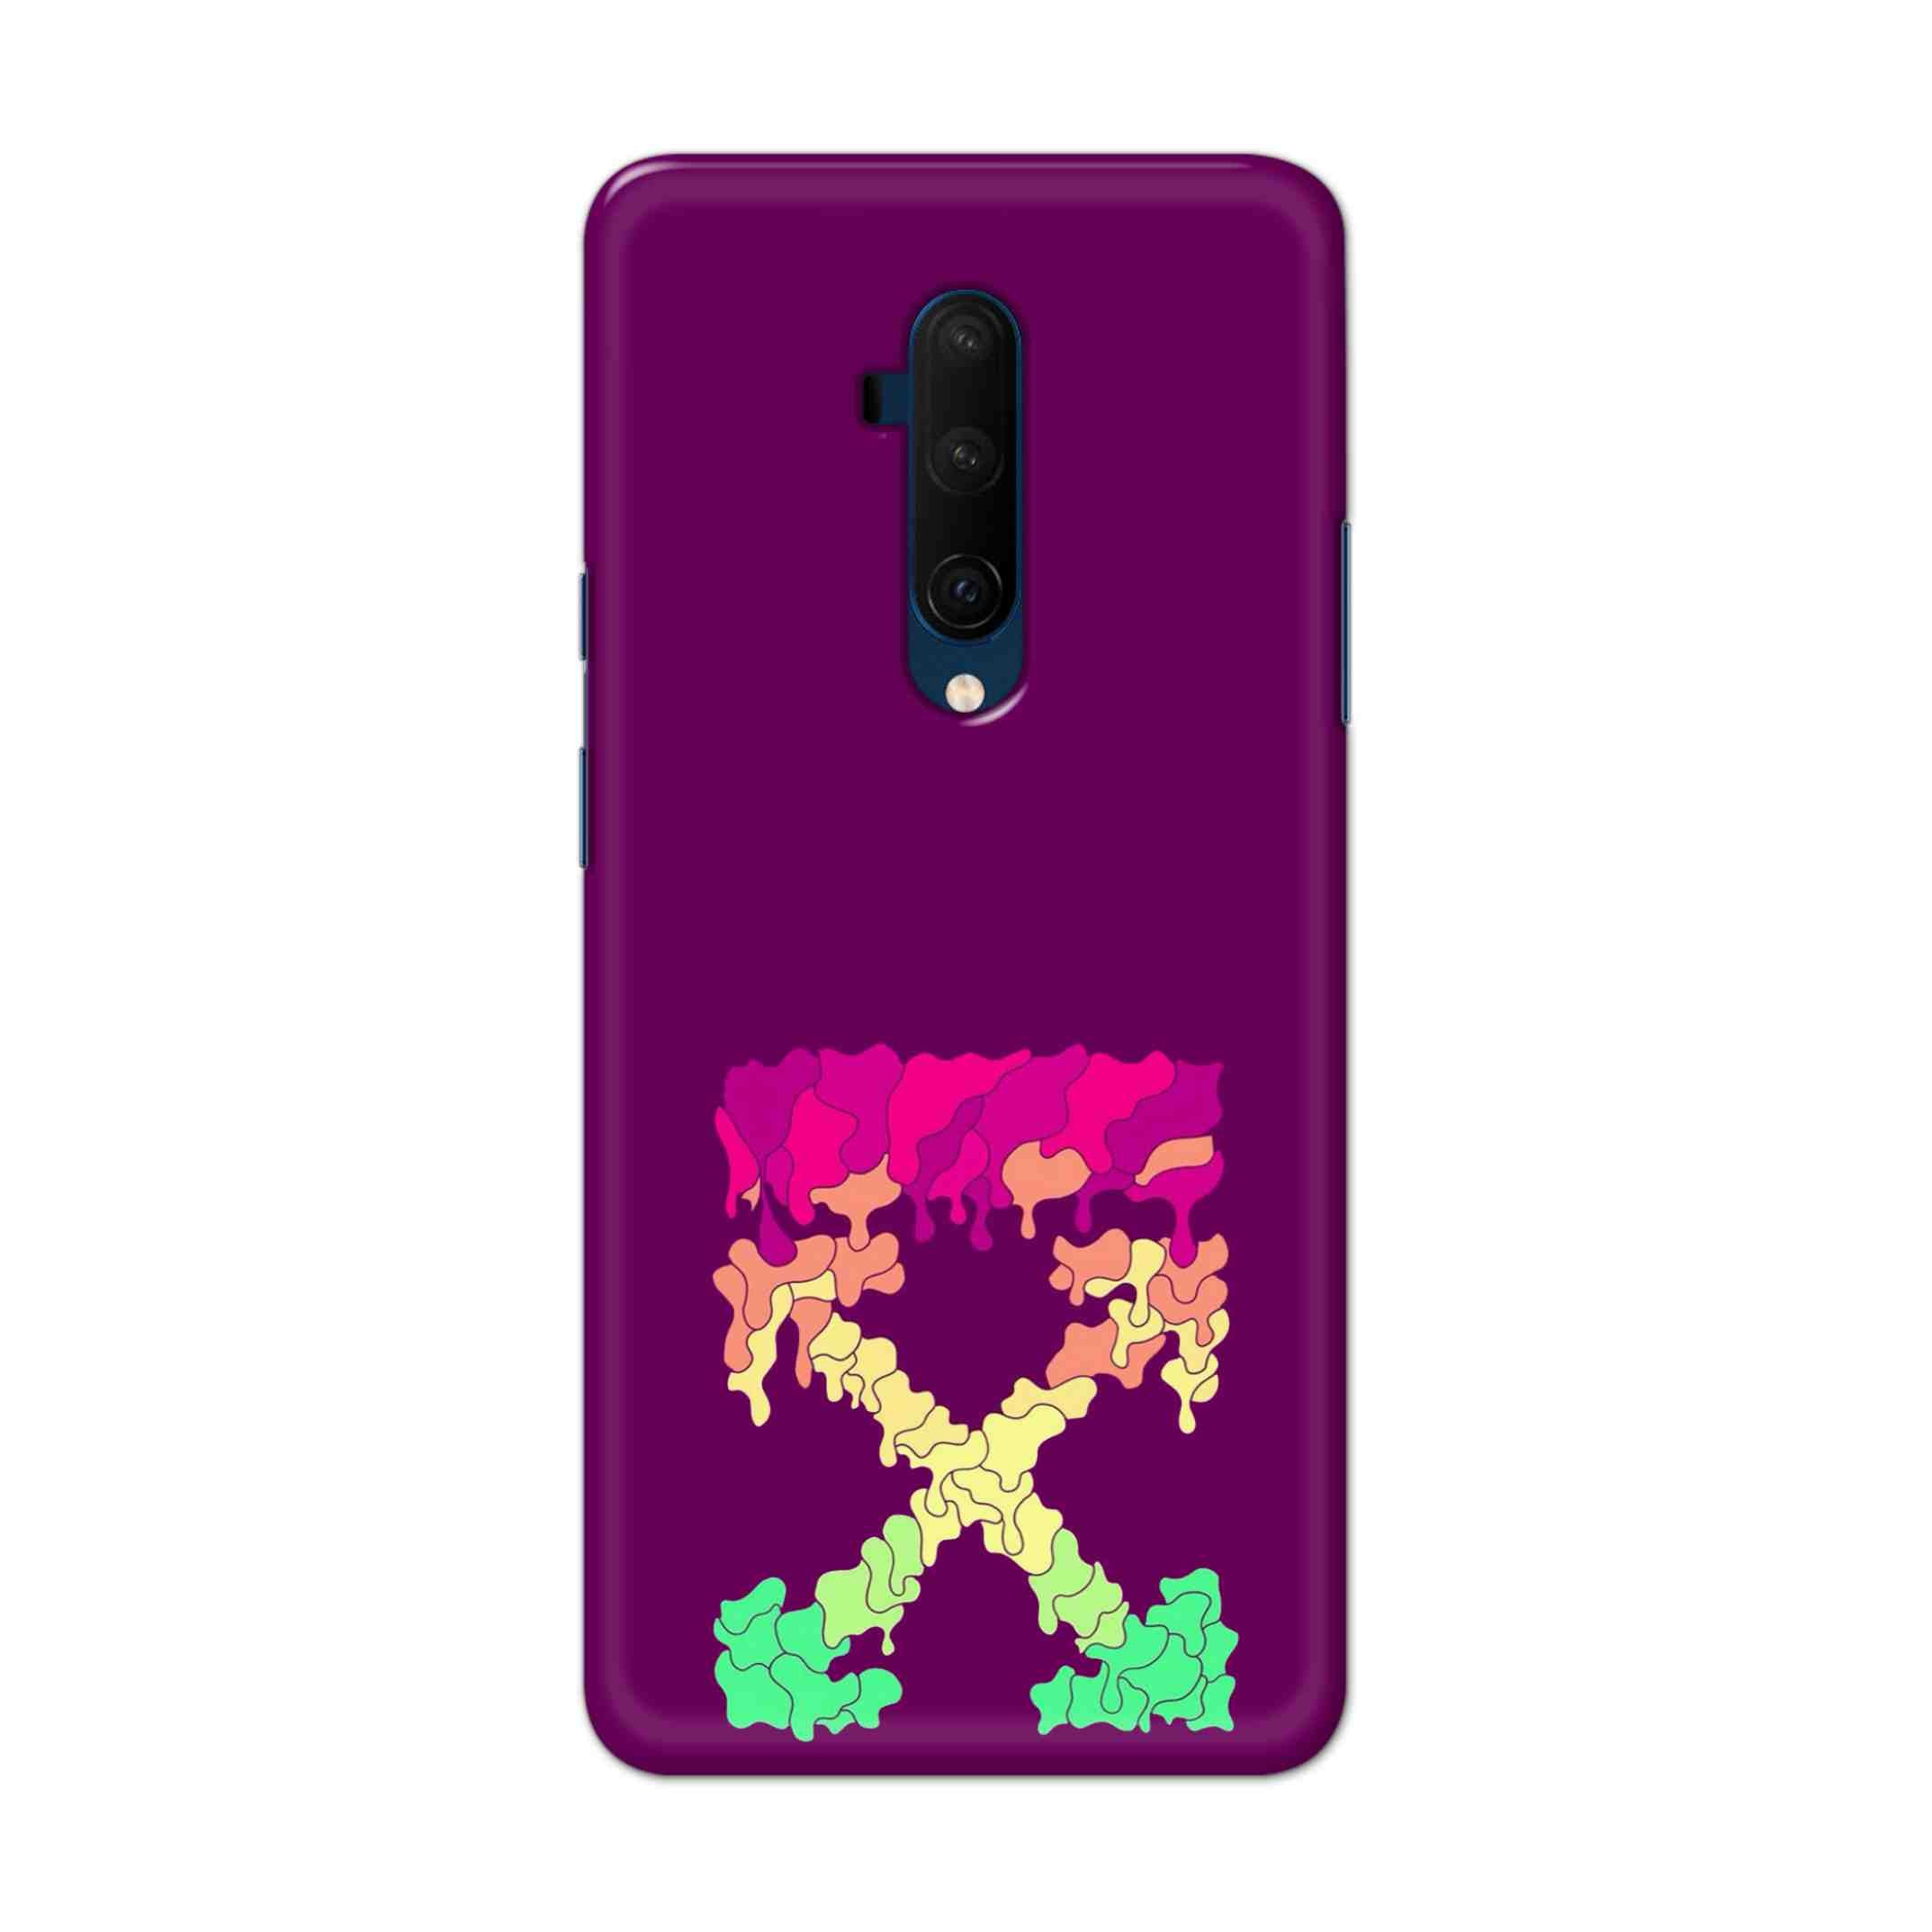 Buy X.O Hard Back Mobile Phone Case Cover For OnePlus 7T Pro Online